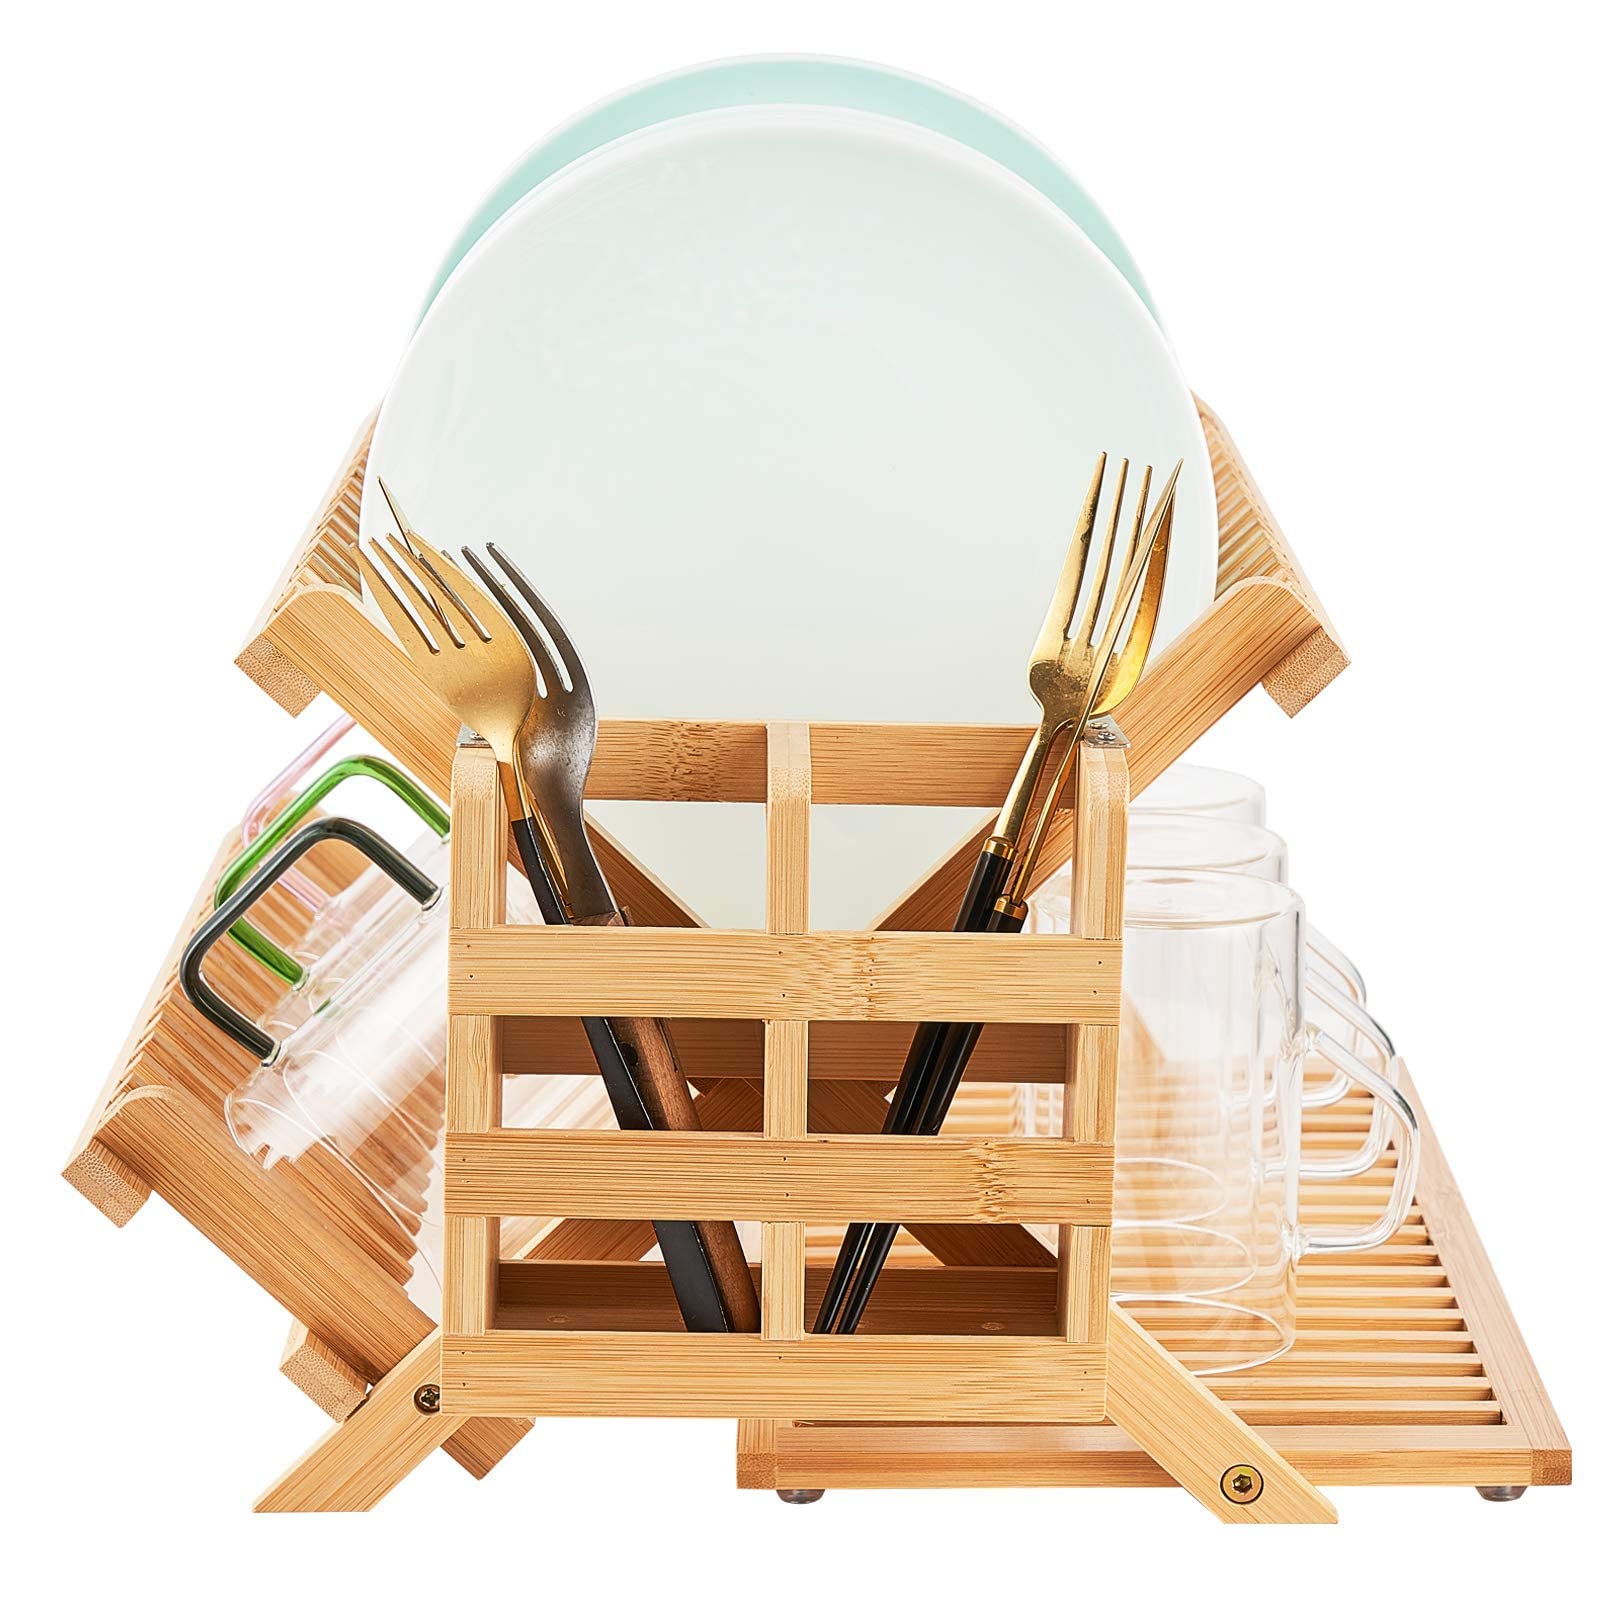 Shangrun 3 Tier Collapsible Wooden Dish Drying Rack with Utensil Holder